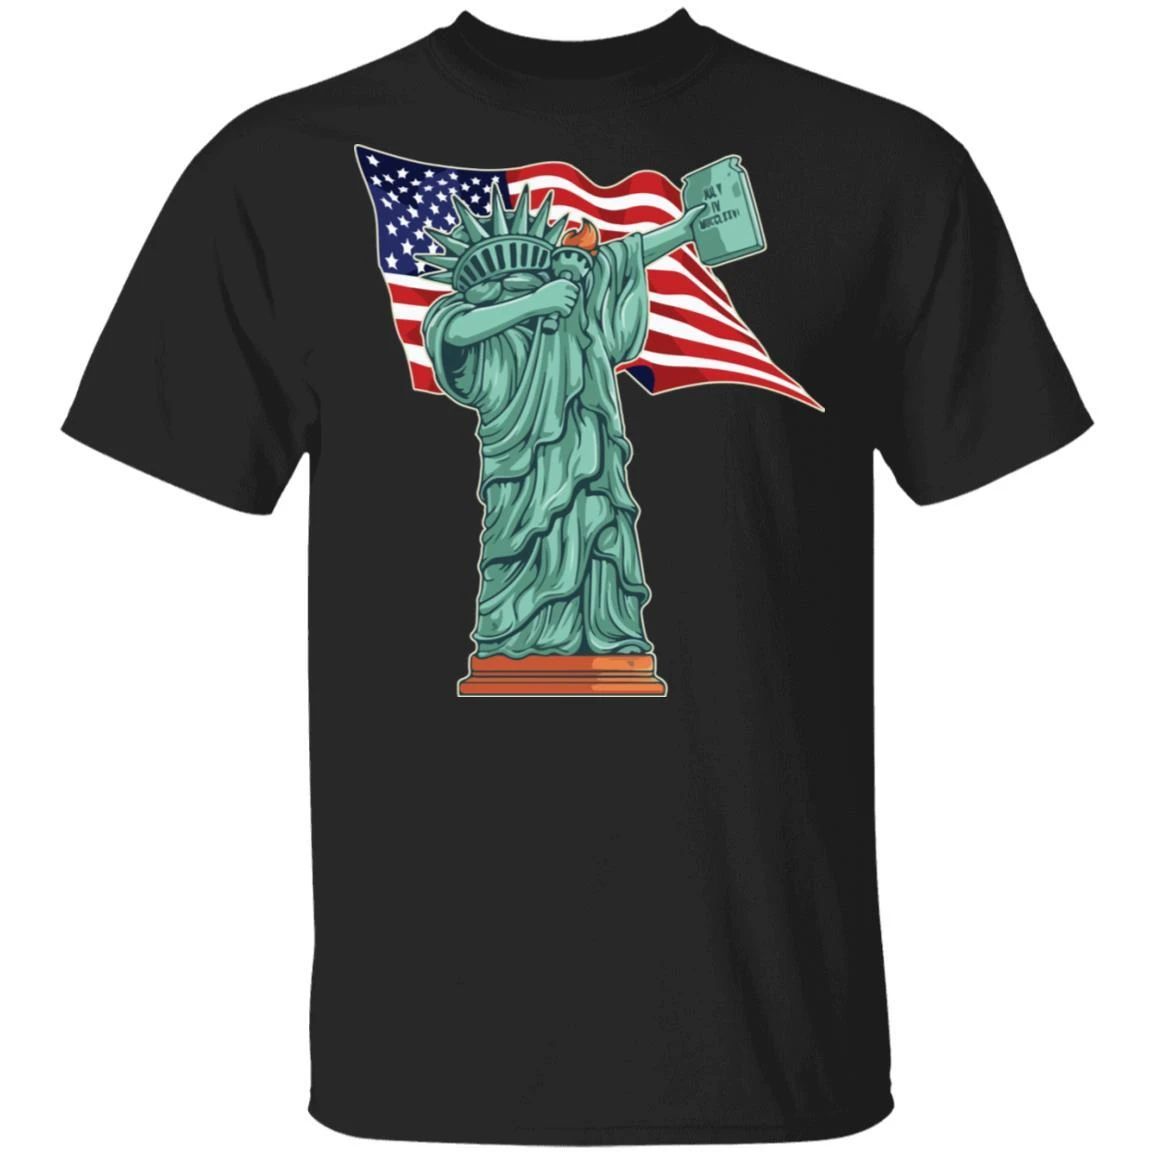 The Dabbing Statue Of Liberty T-shirt 4th Of July Tee